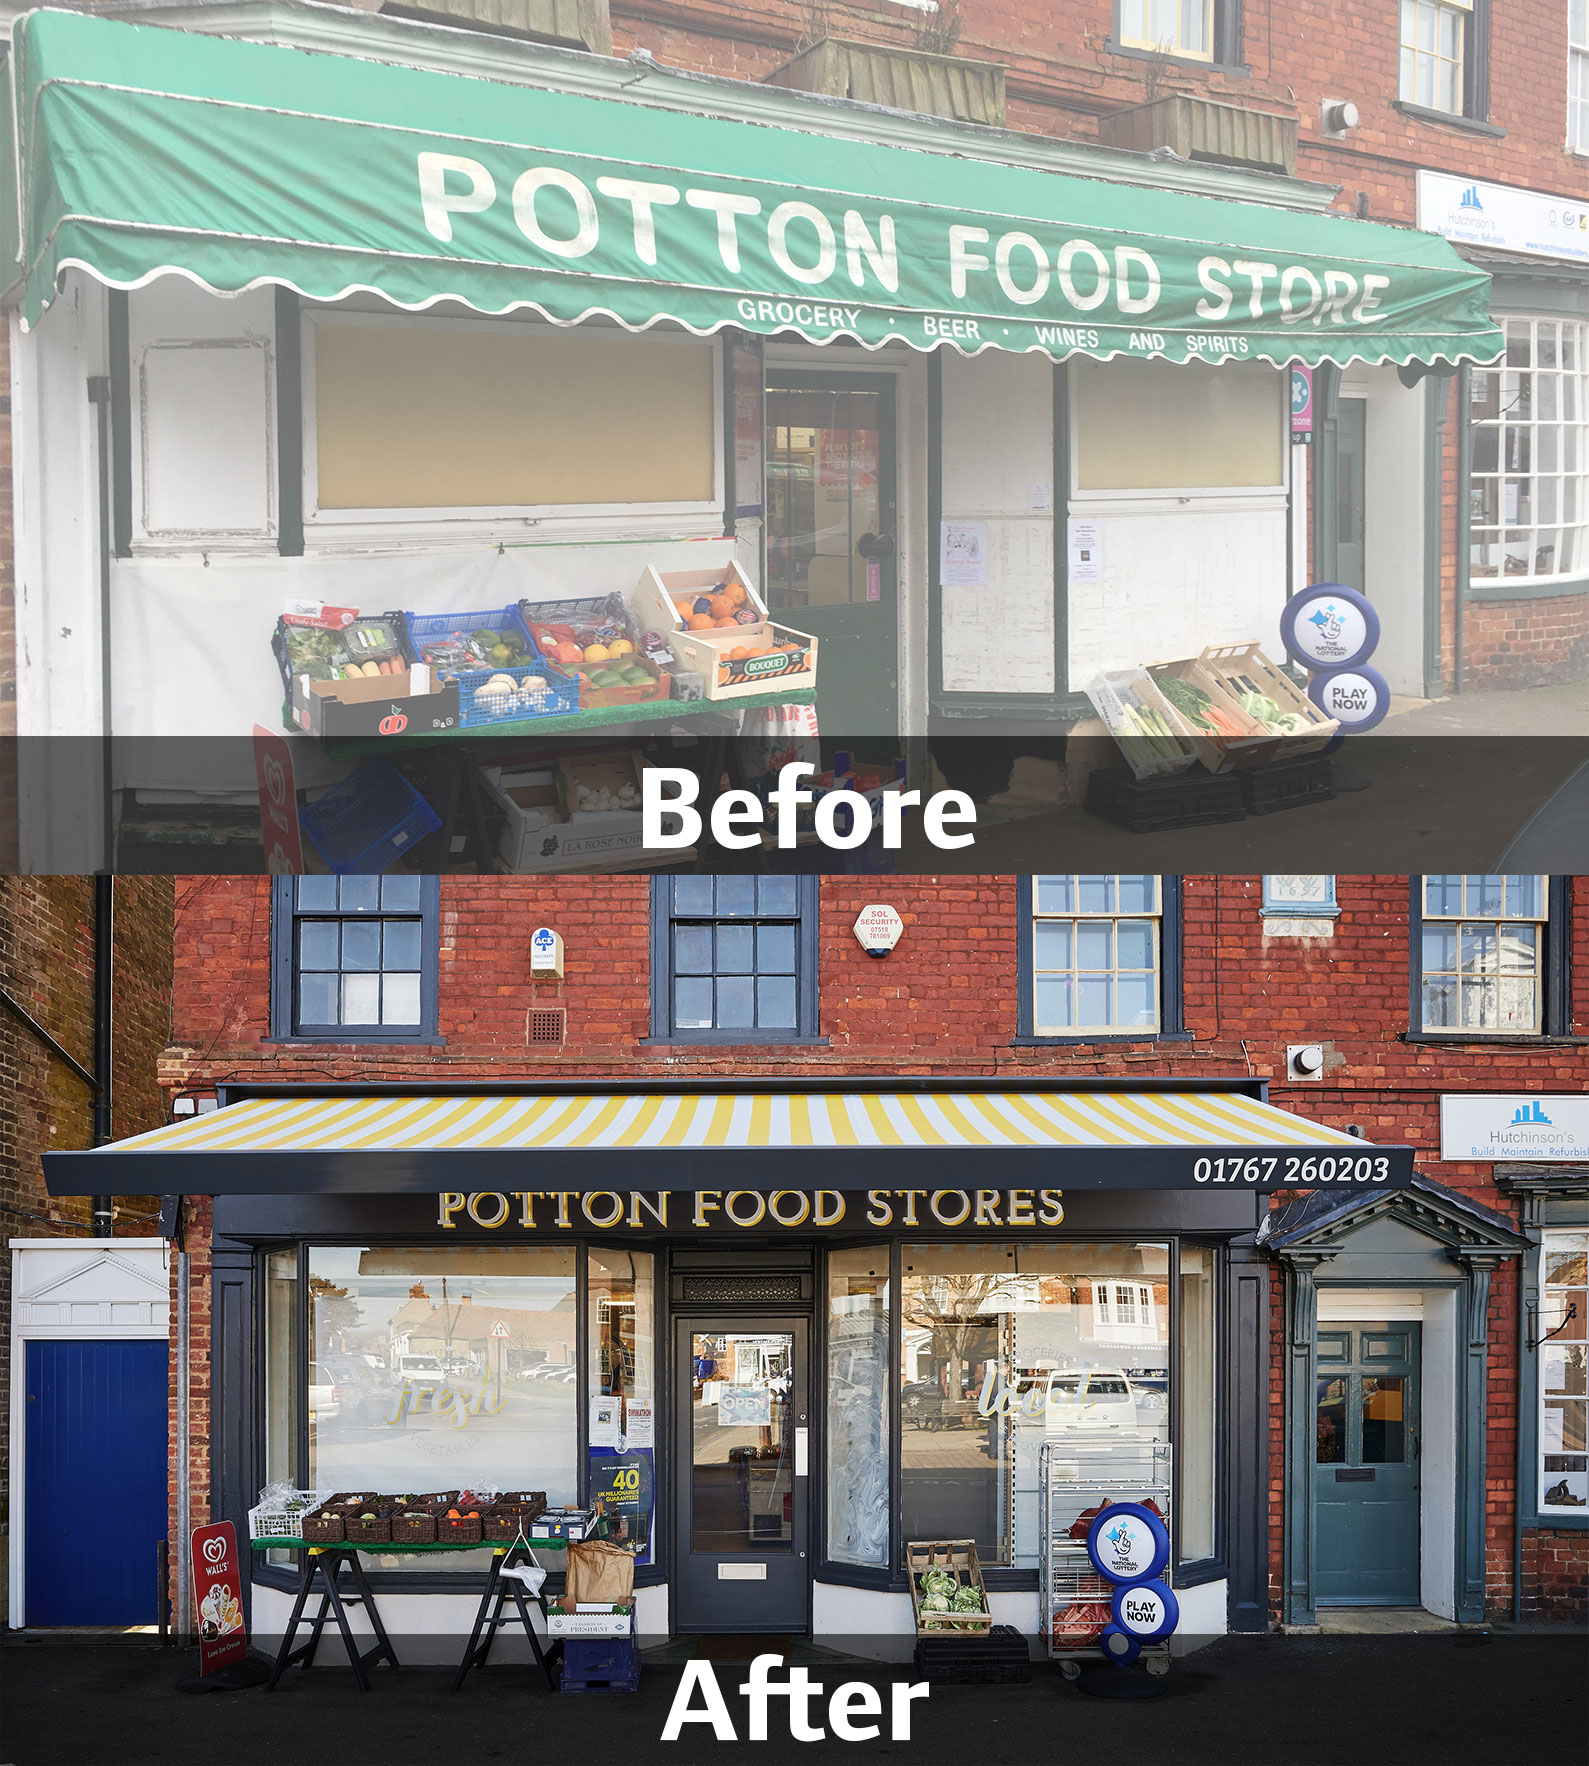 Potton Food Stores, before and after